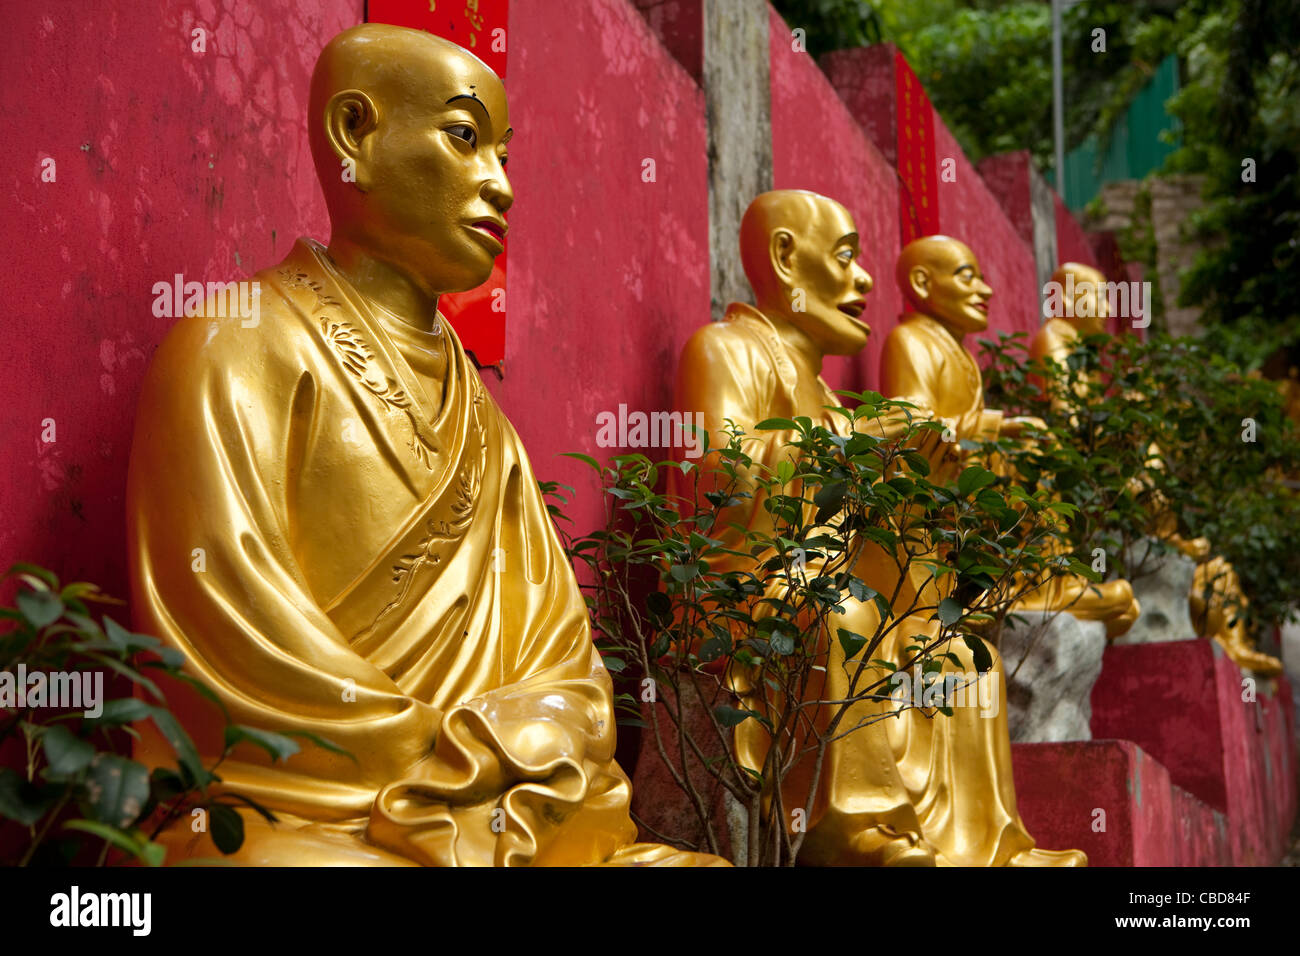 10 000 Bouddhas Monastery, Hong Kong, Chine Banque D'Images